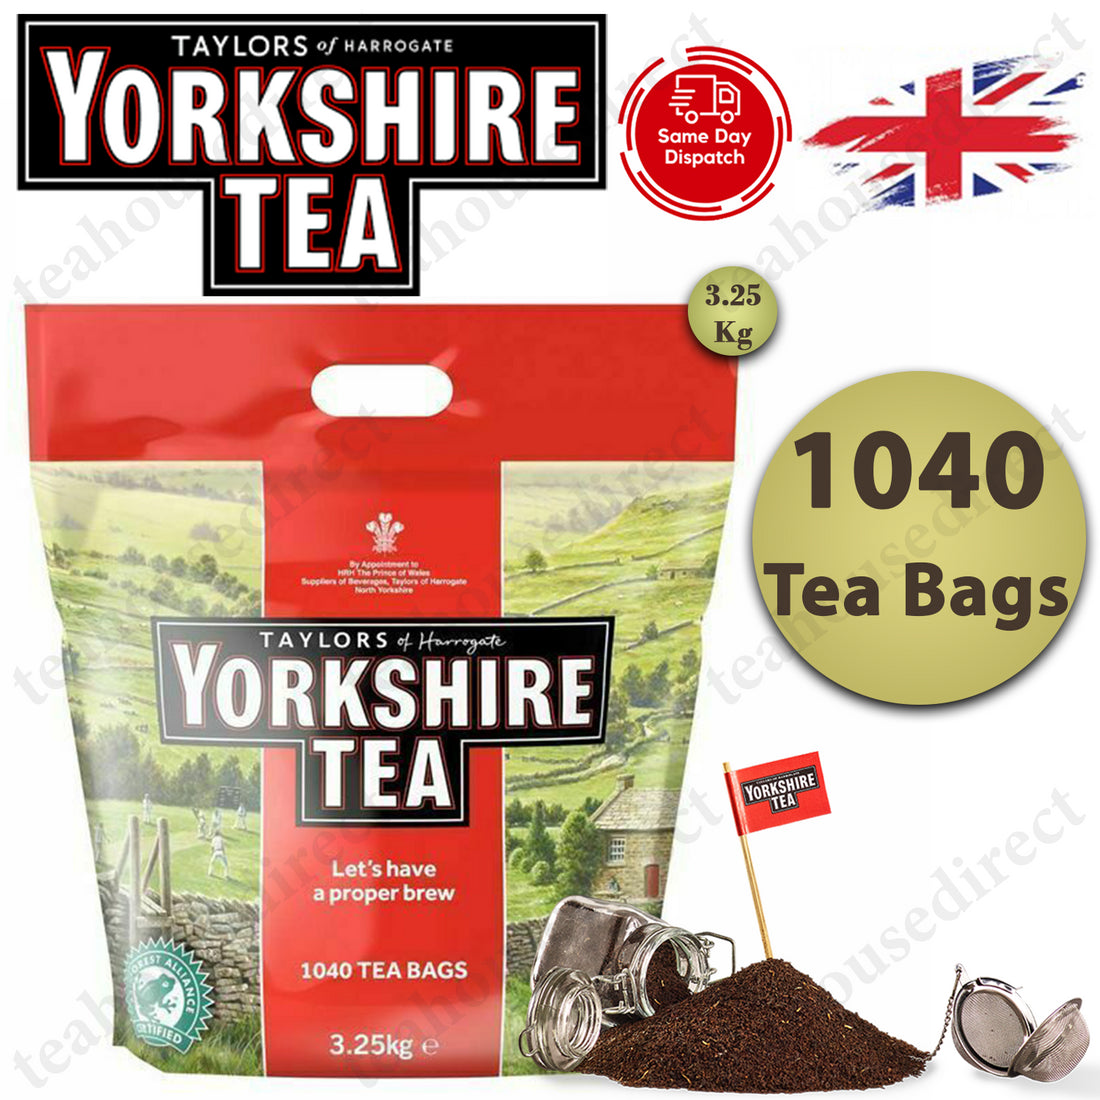 Yorkshire Tea Bags, 3.25 Kg (1040 Teabags), £9.75 at